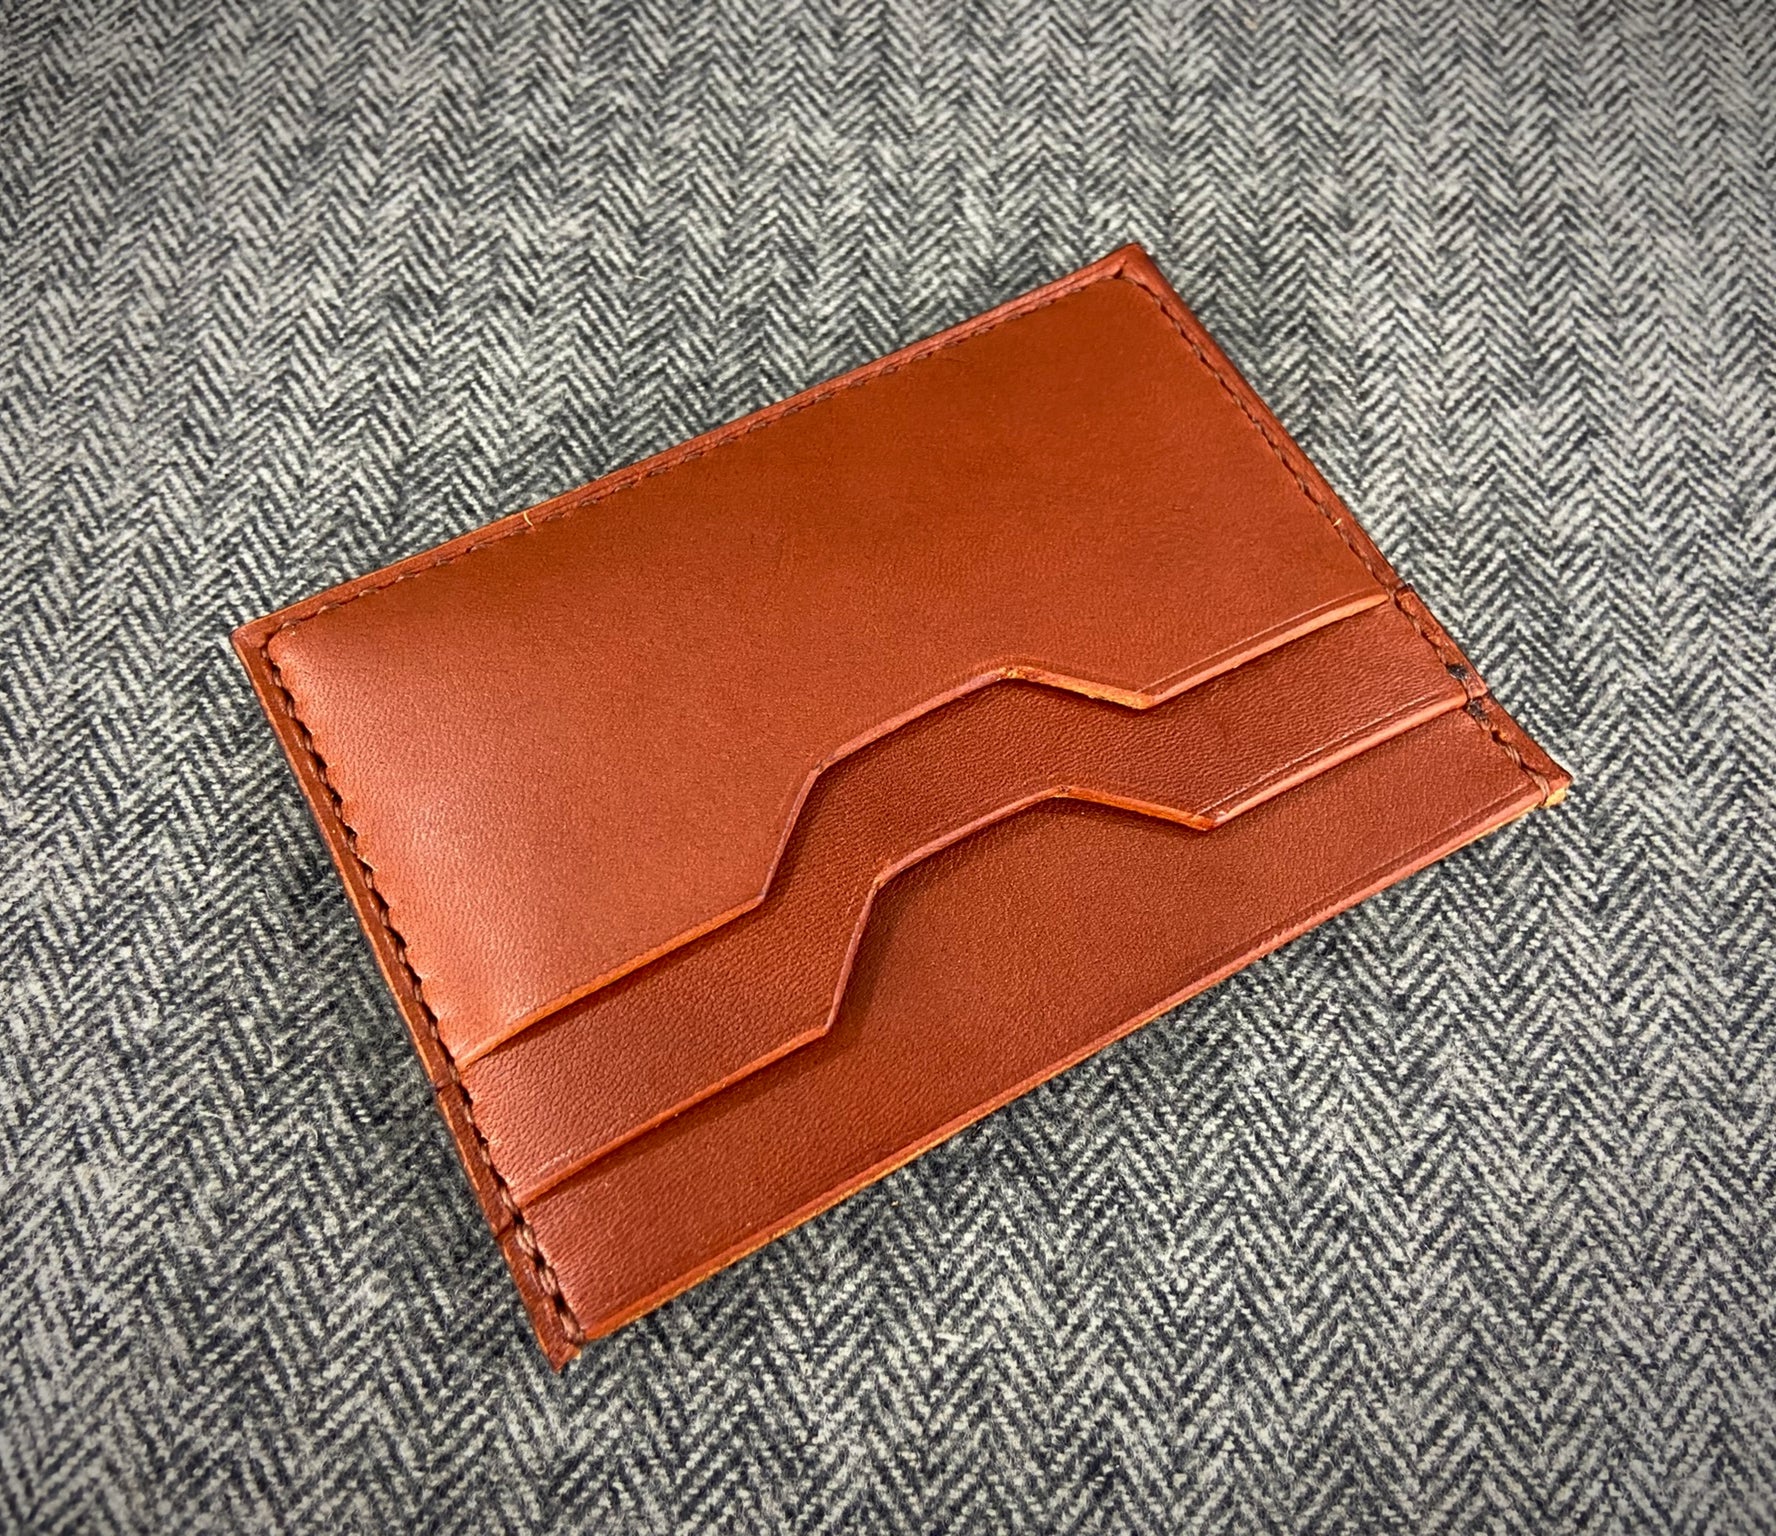 Slim Leather Wallet - USA Made - Full Grain Leather